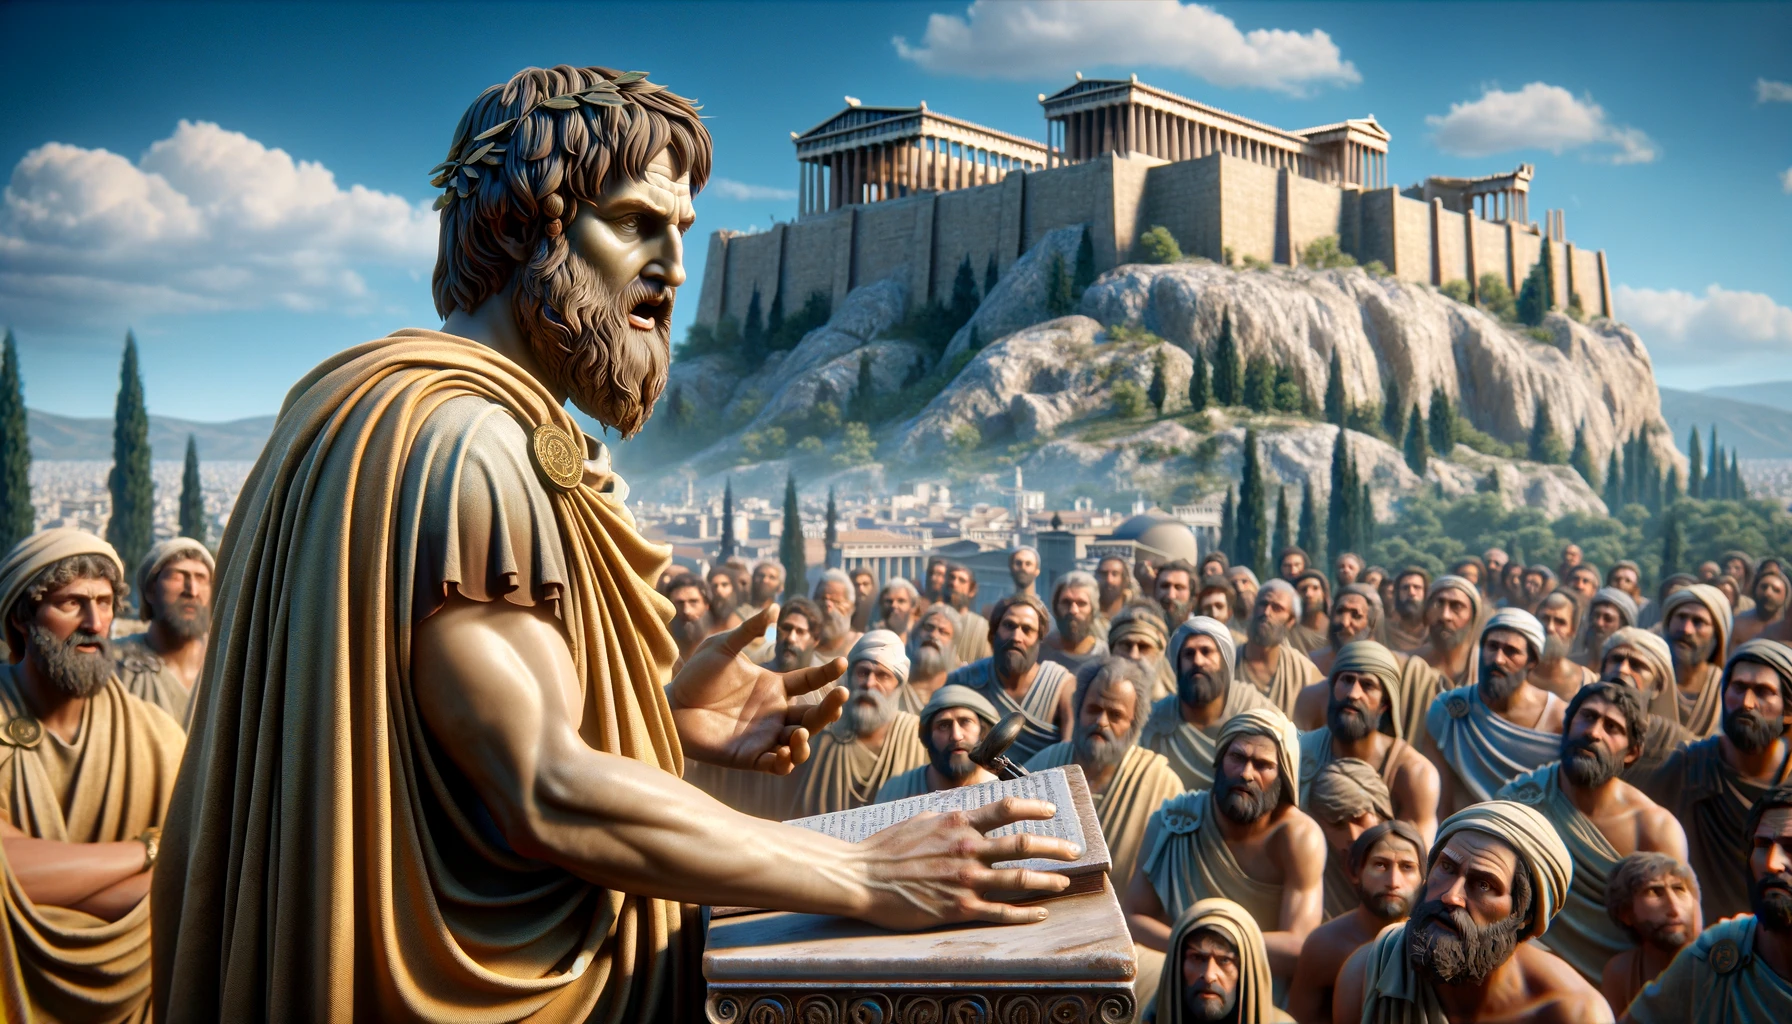 Pericles delivering a speech on Pnyx Hill